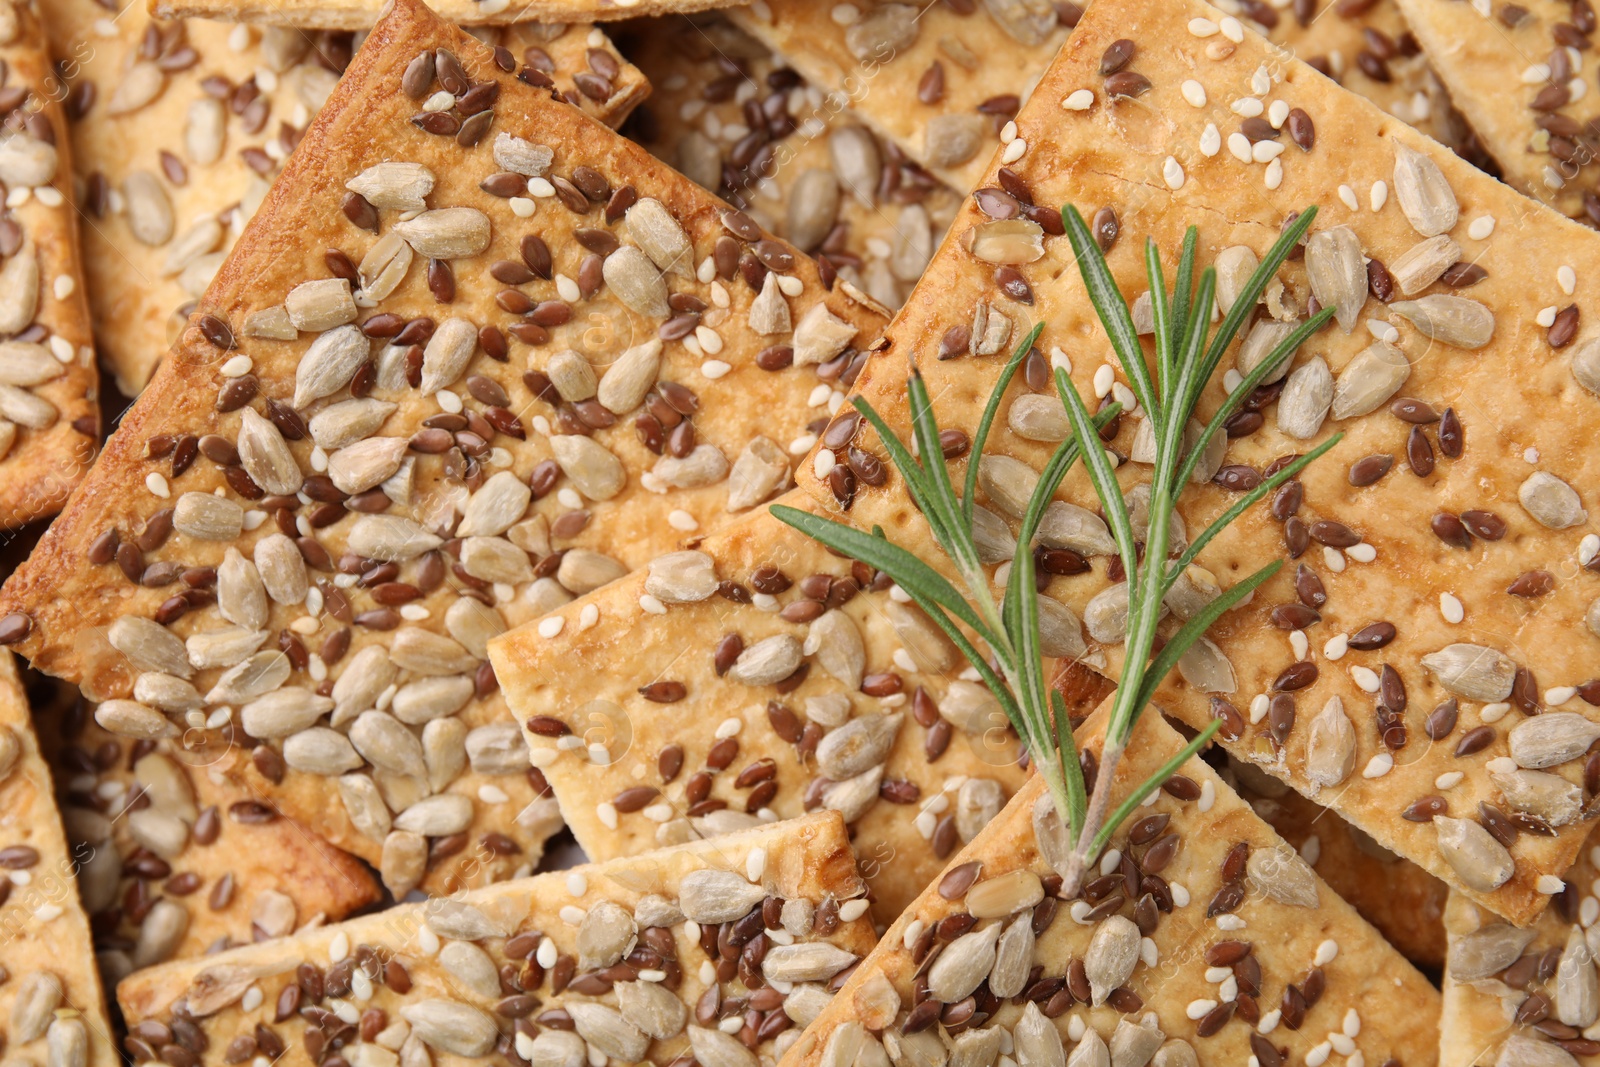 Photo of Rosemary on cereal crackers with flax, sunflower and sesame seeds, top view